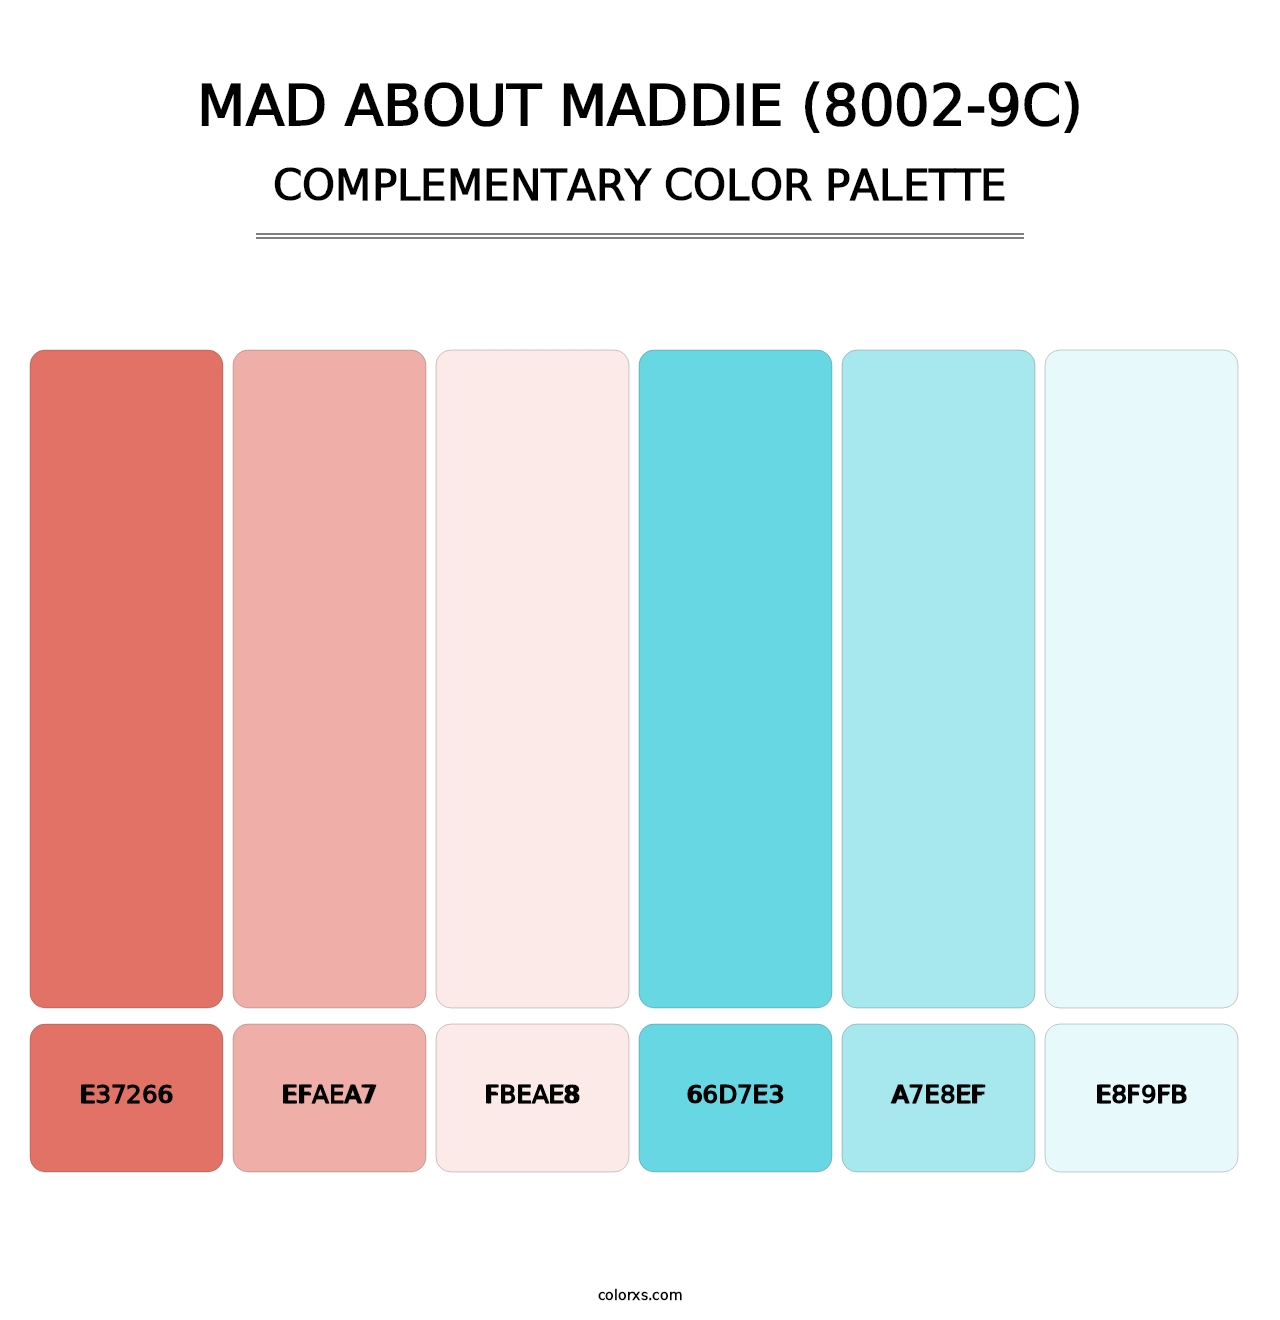 Mad About Maddie (8002-9C) - Complementary Color Palette